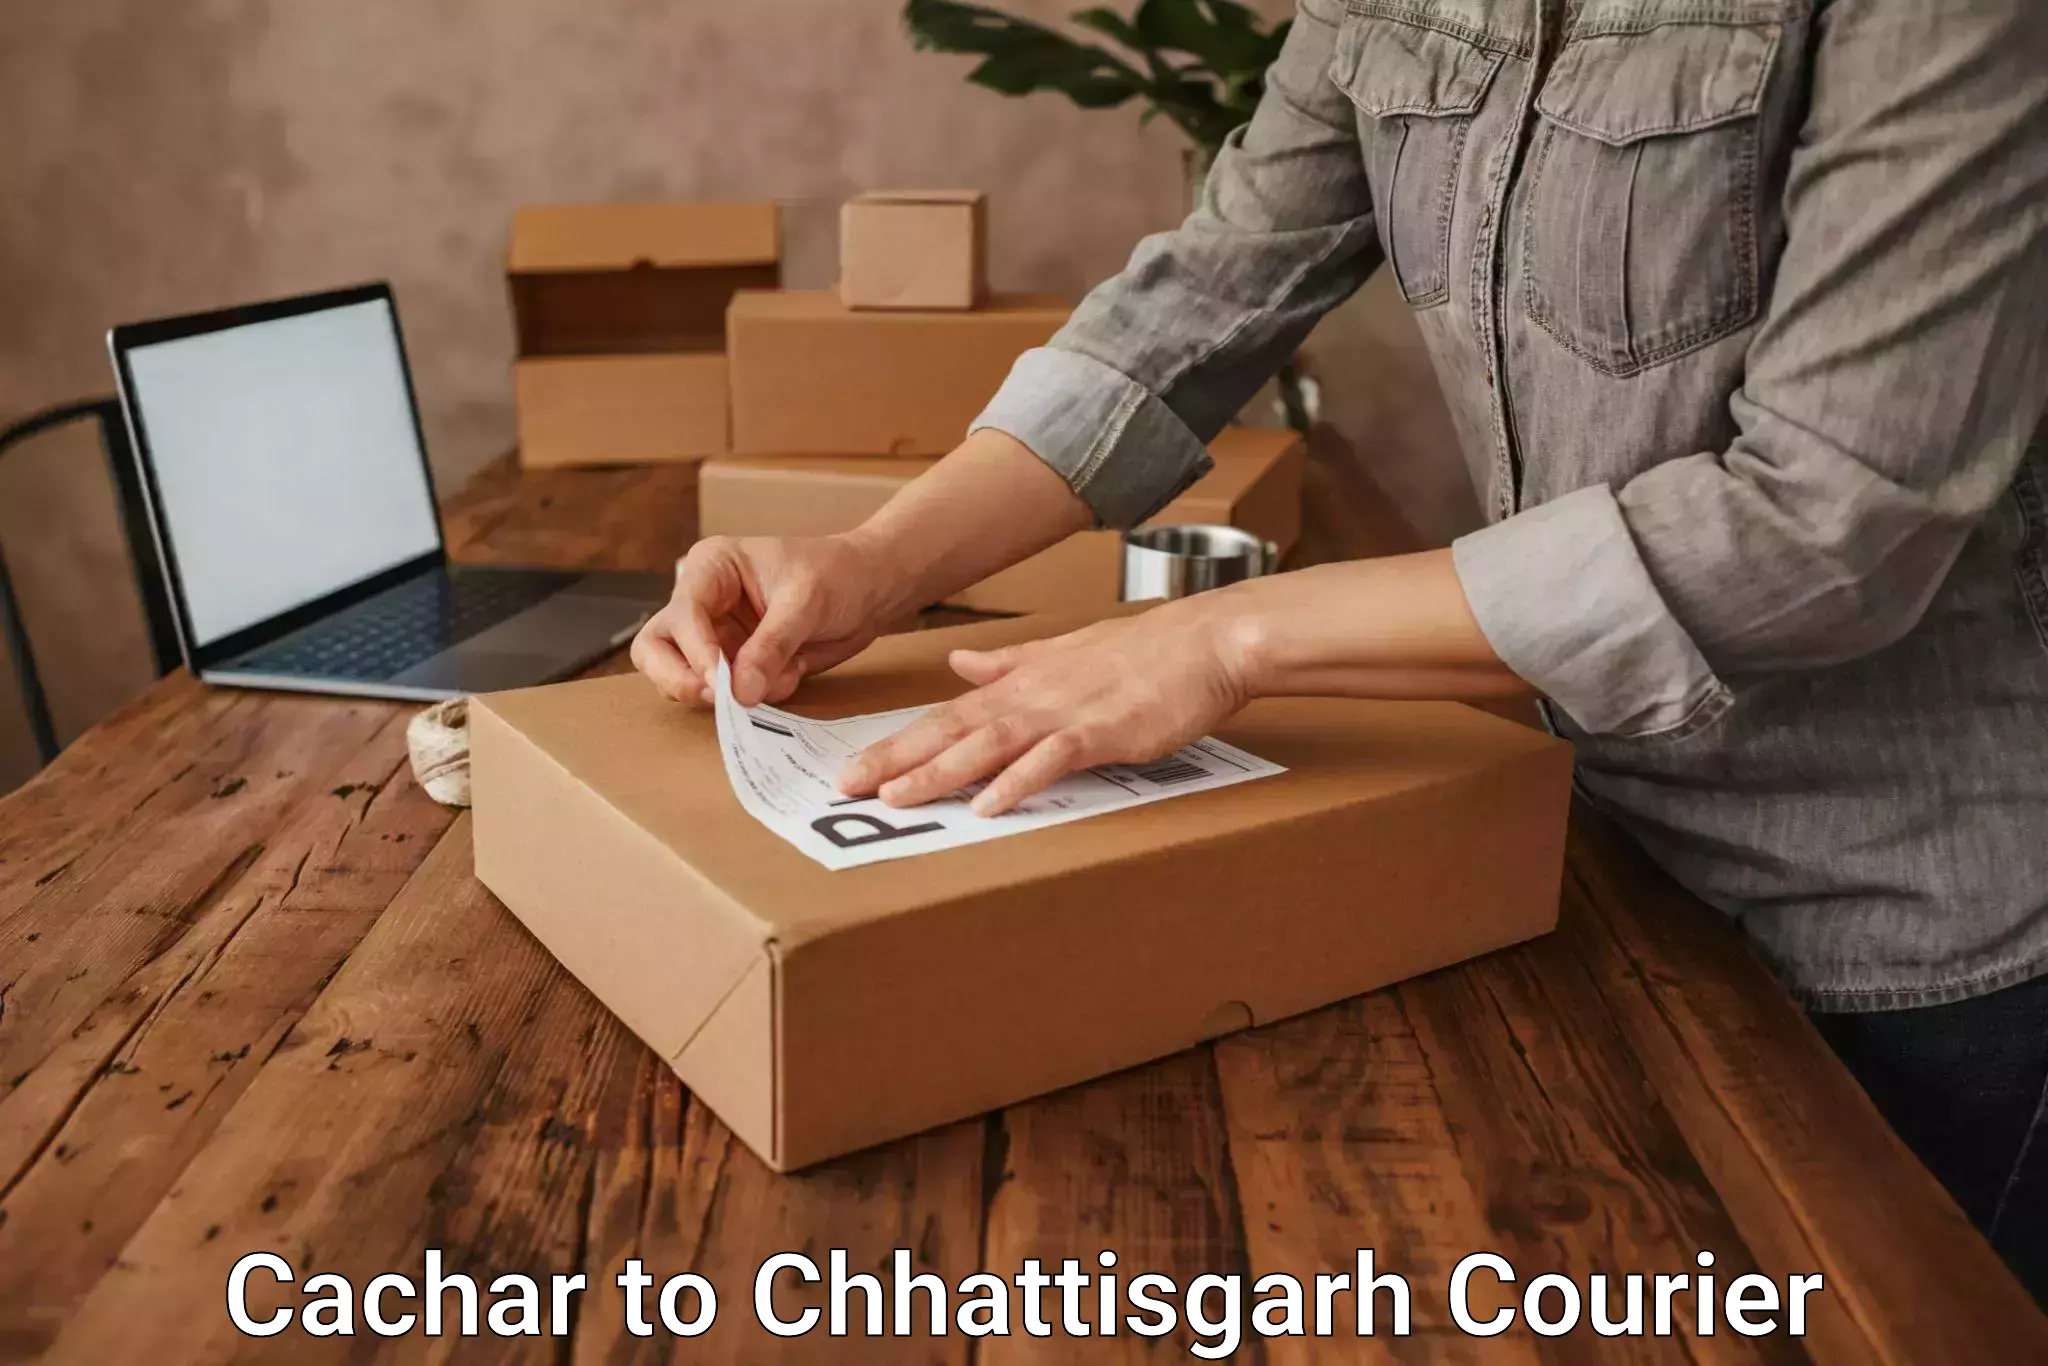 Subscription-based courier Cachar to Dantewada